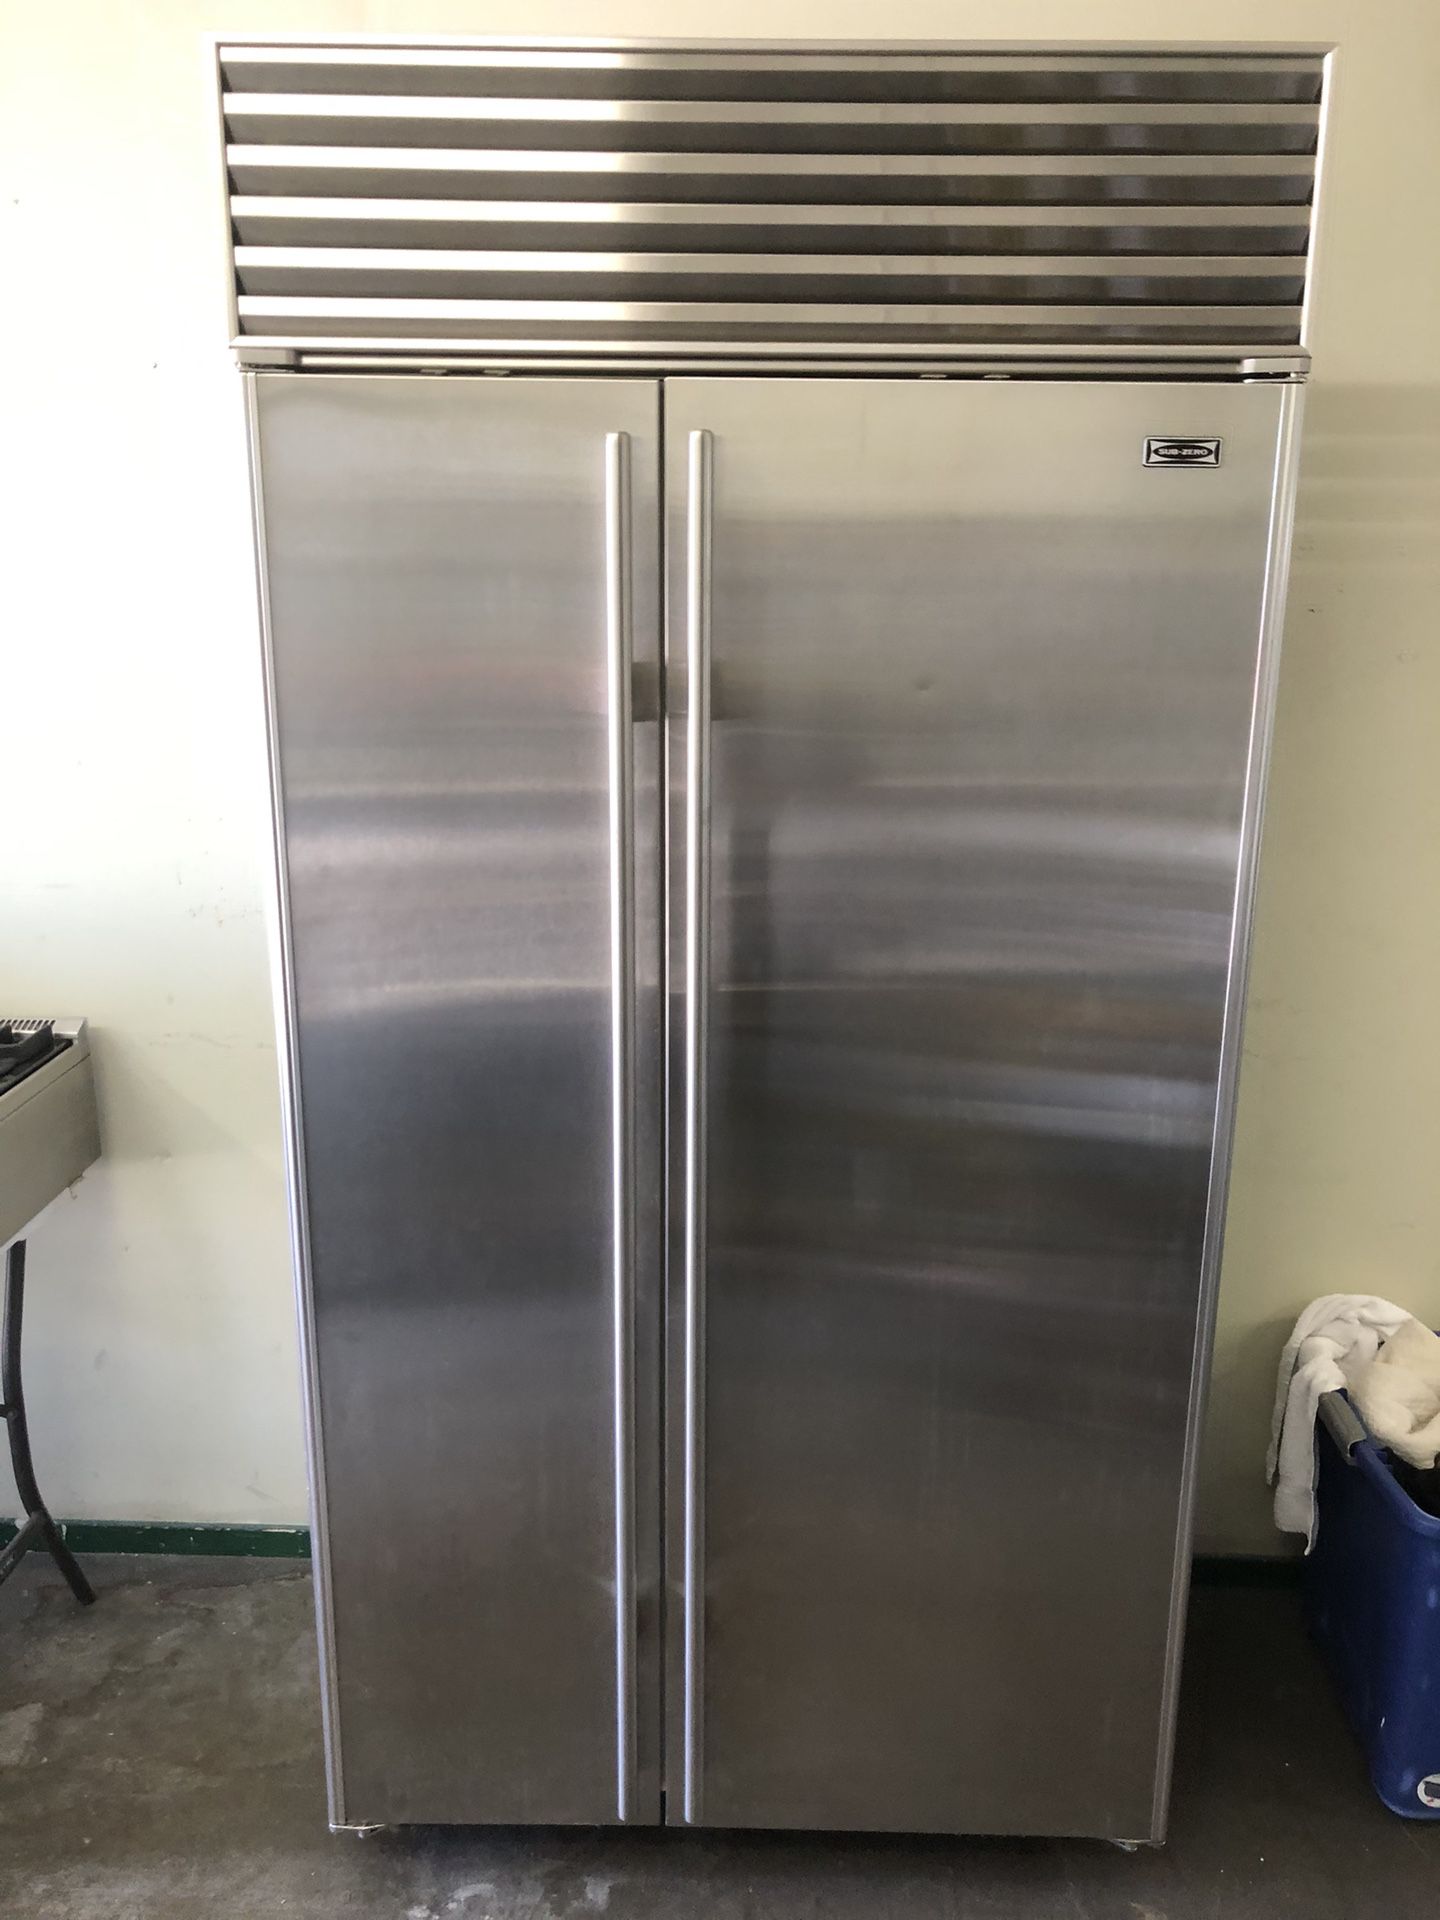 Sub Zero 42”Wide Stainless Steel Built In Refrigerator Side By Side